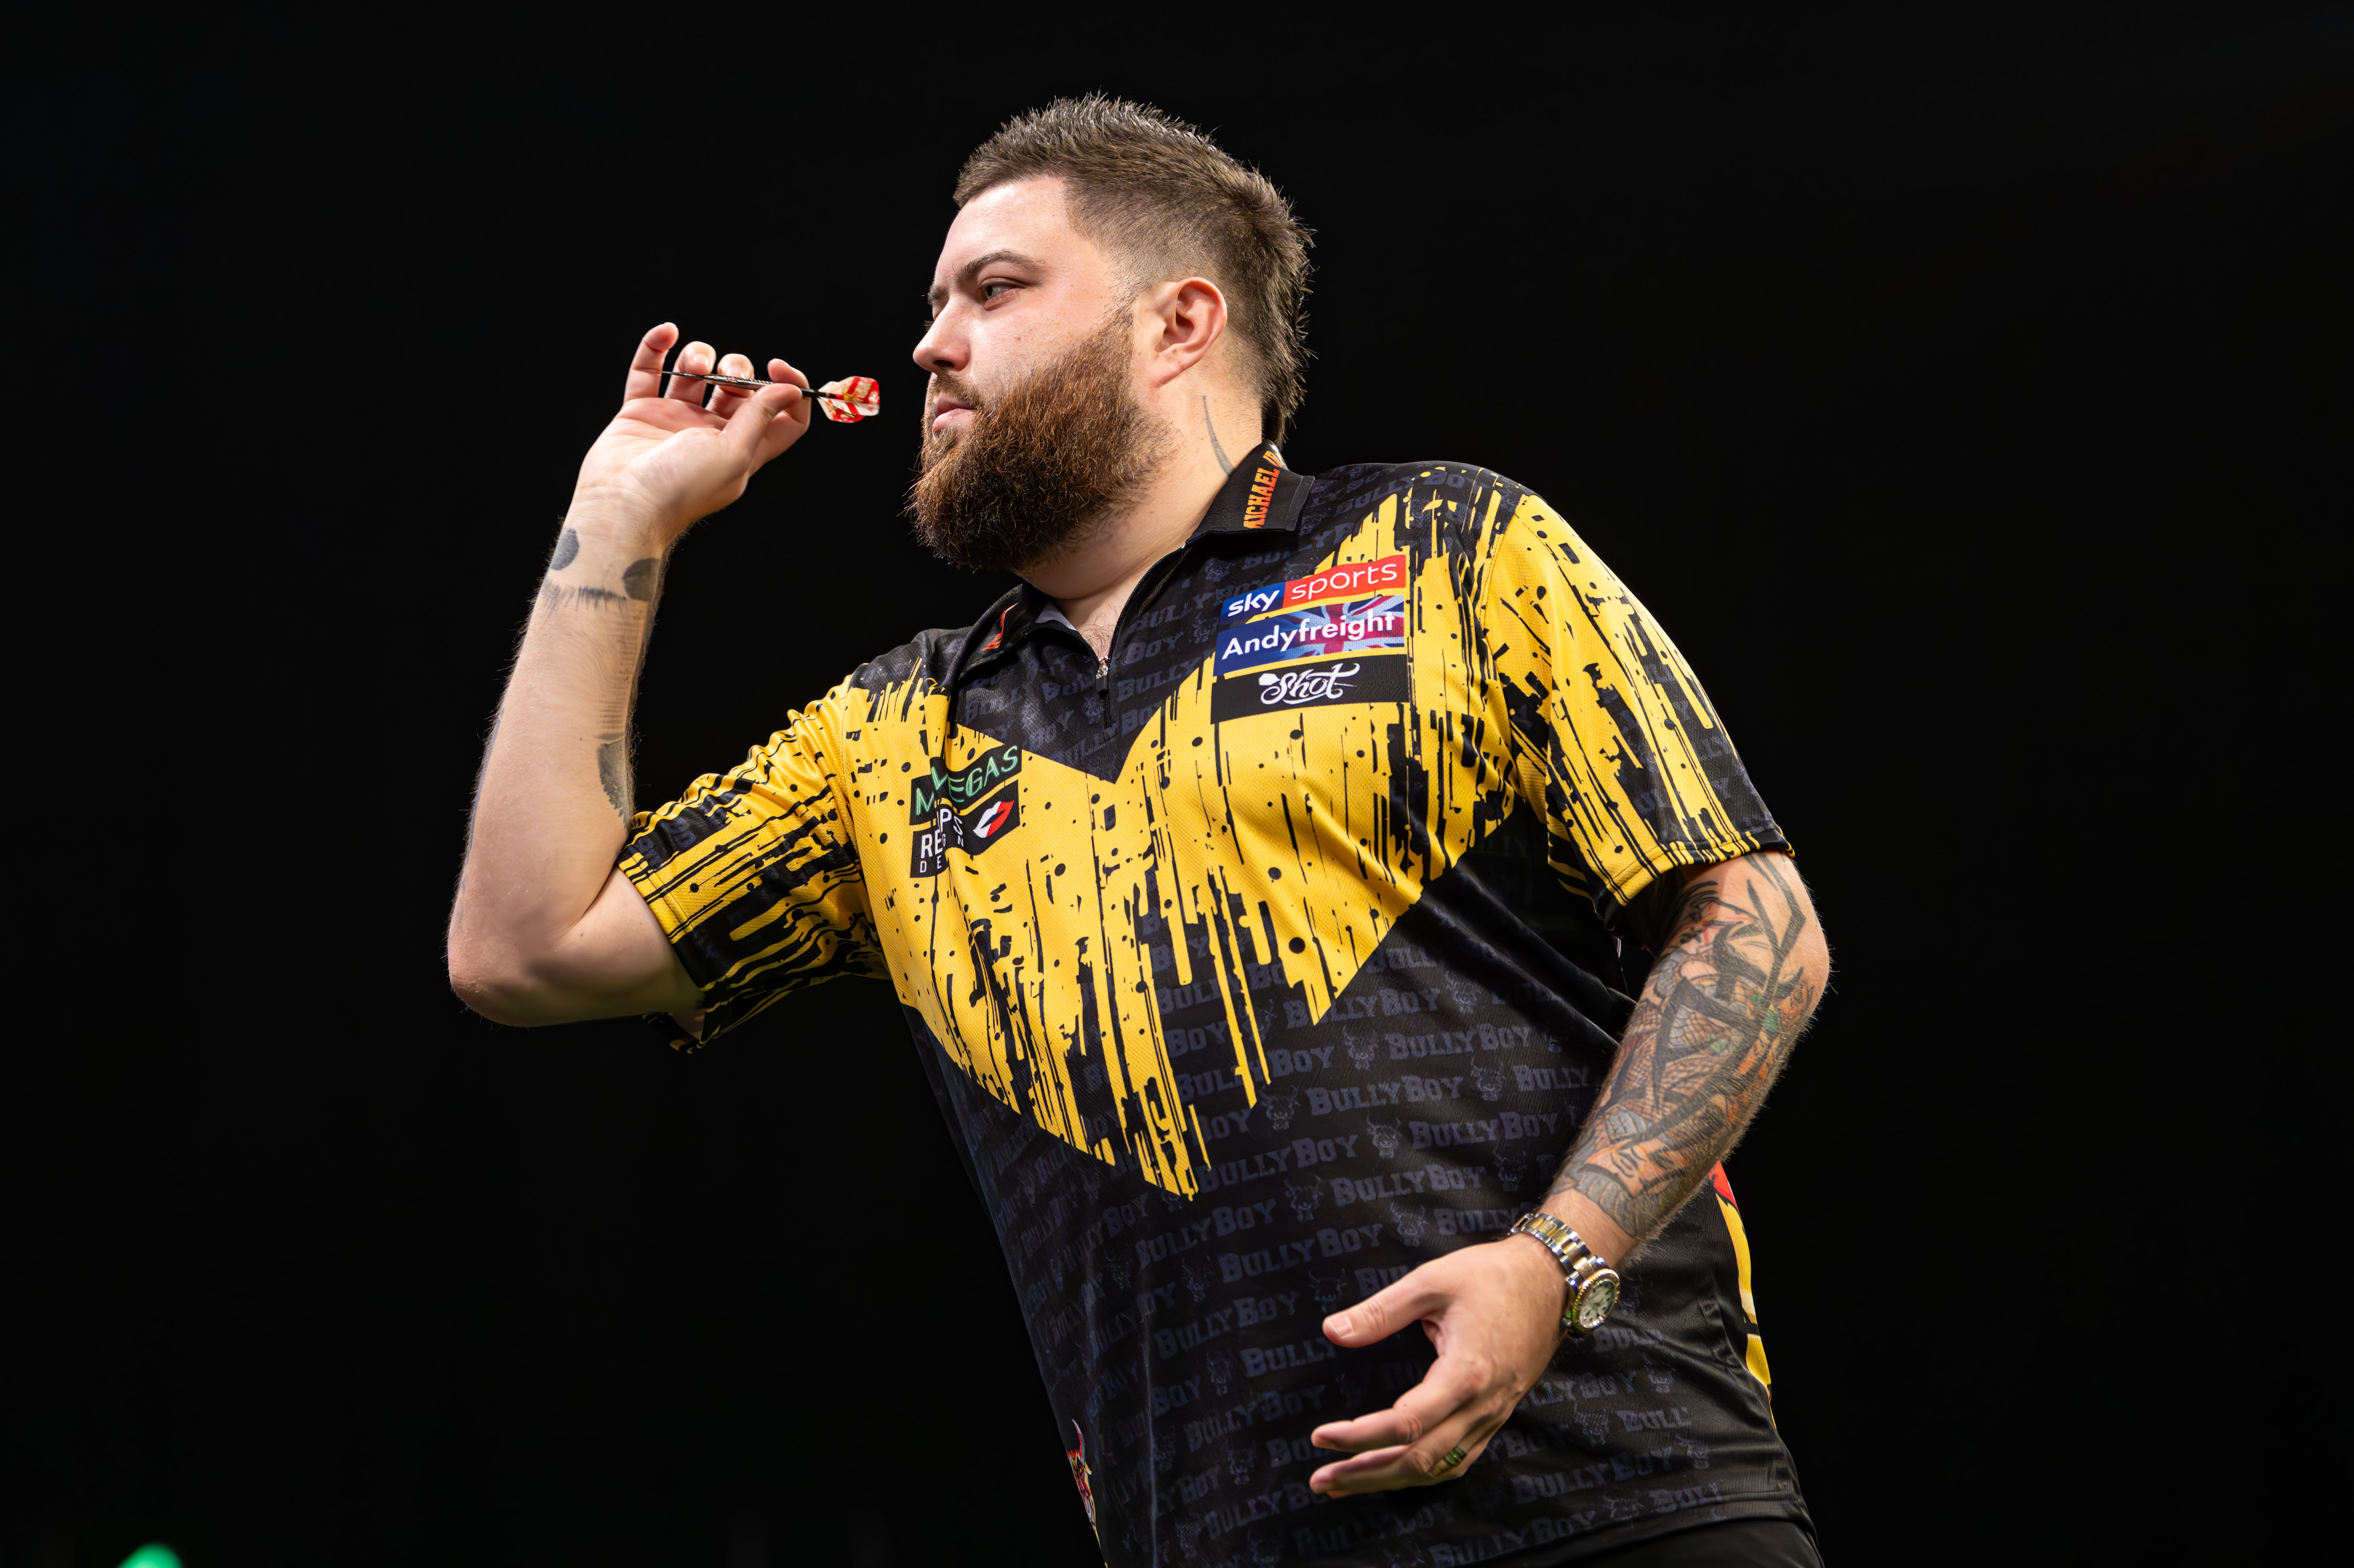 Smith will be back at Ally Pally to defend his crown